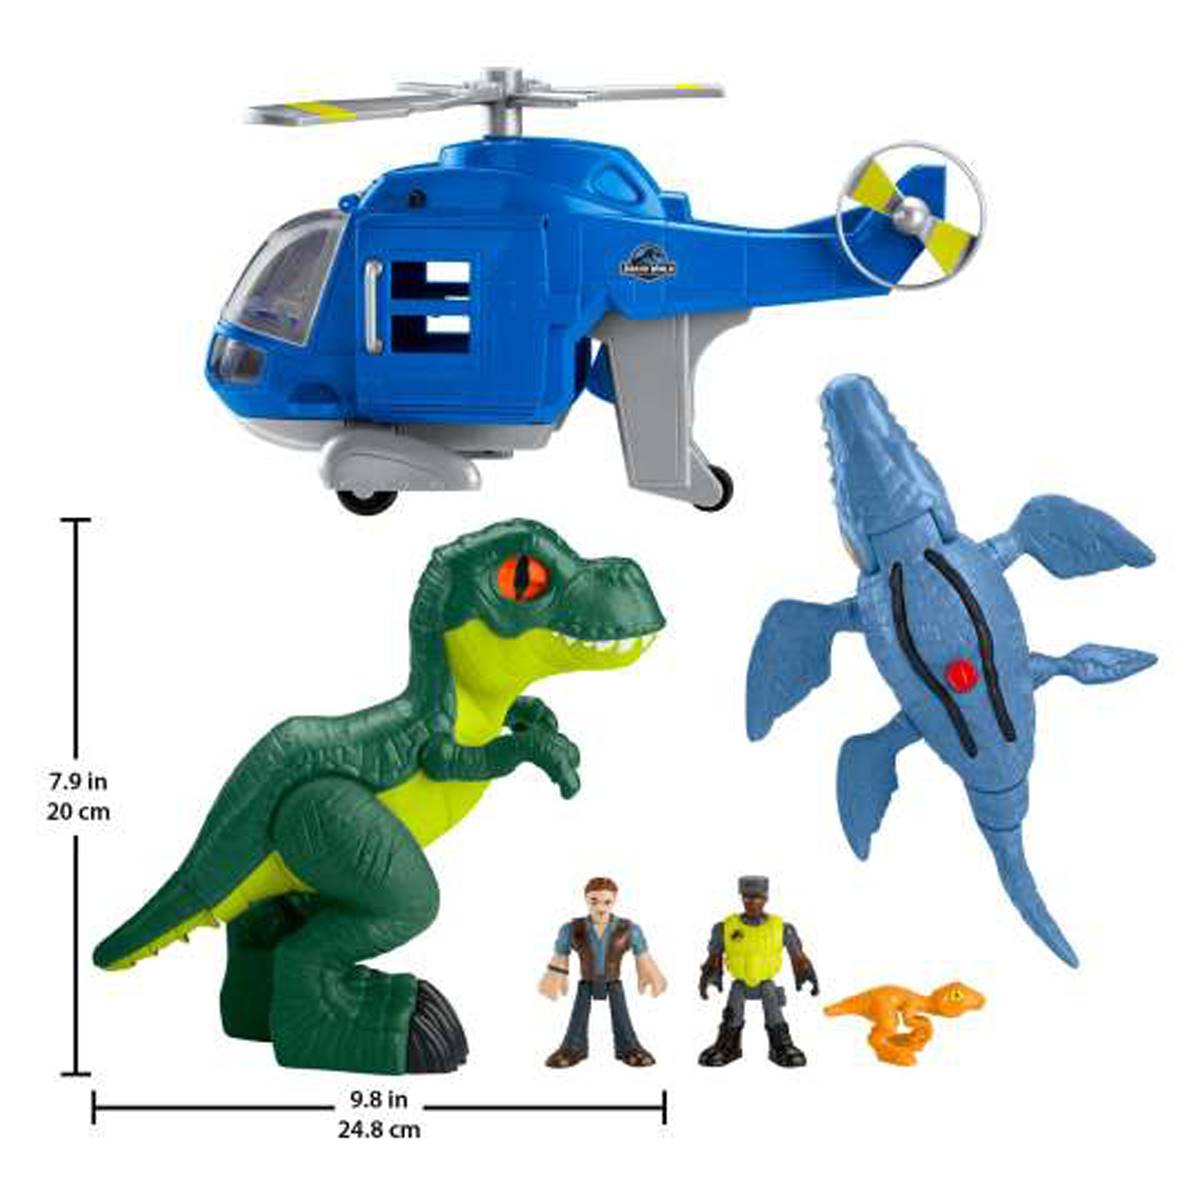 Fisher-Price(R) Imaginext Jurassic World Helicopter